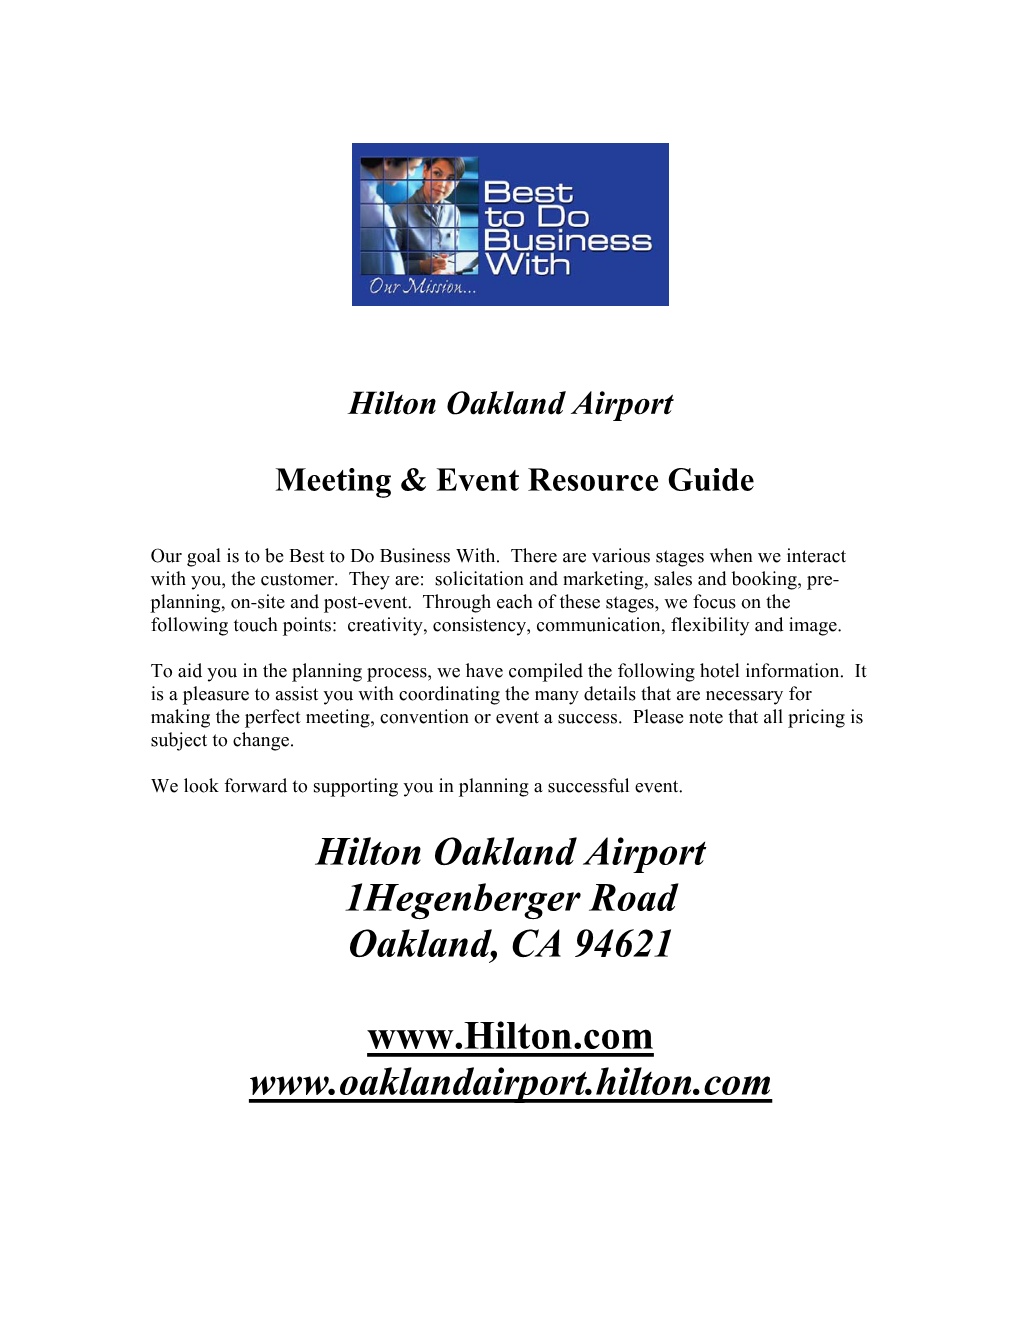 Hilton Oakland Airport Meeting & Event Resource Guide